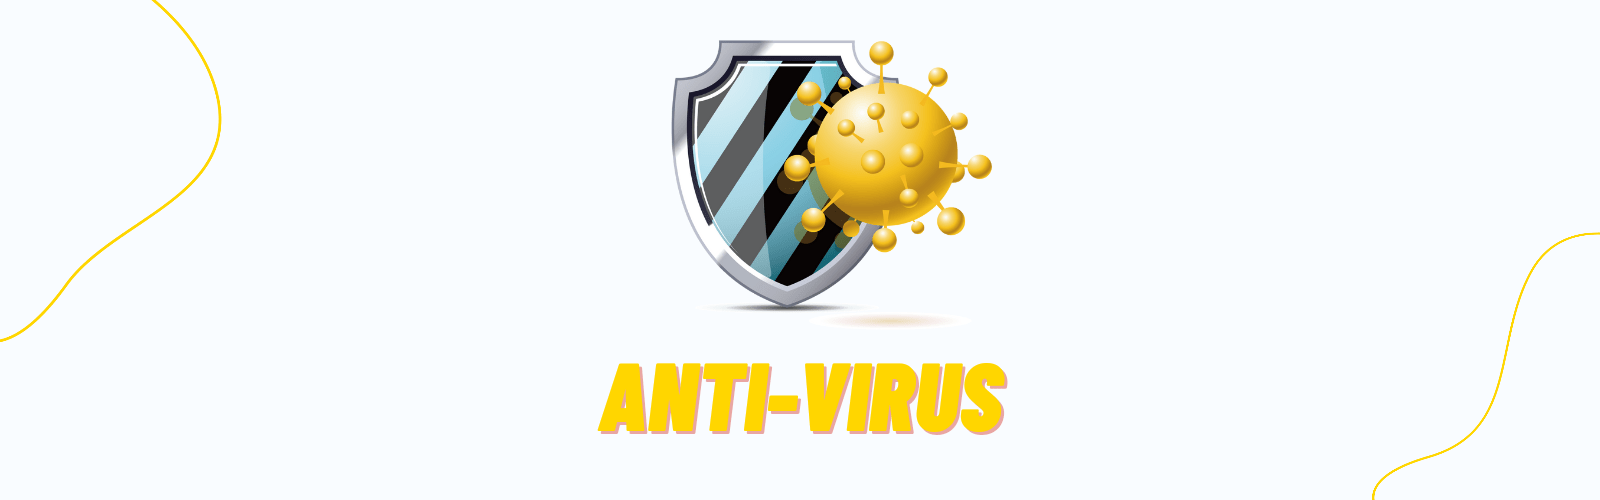 antivirus categorie software security for computer